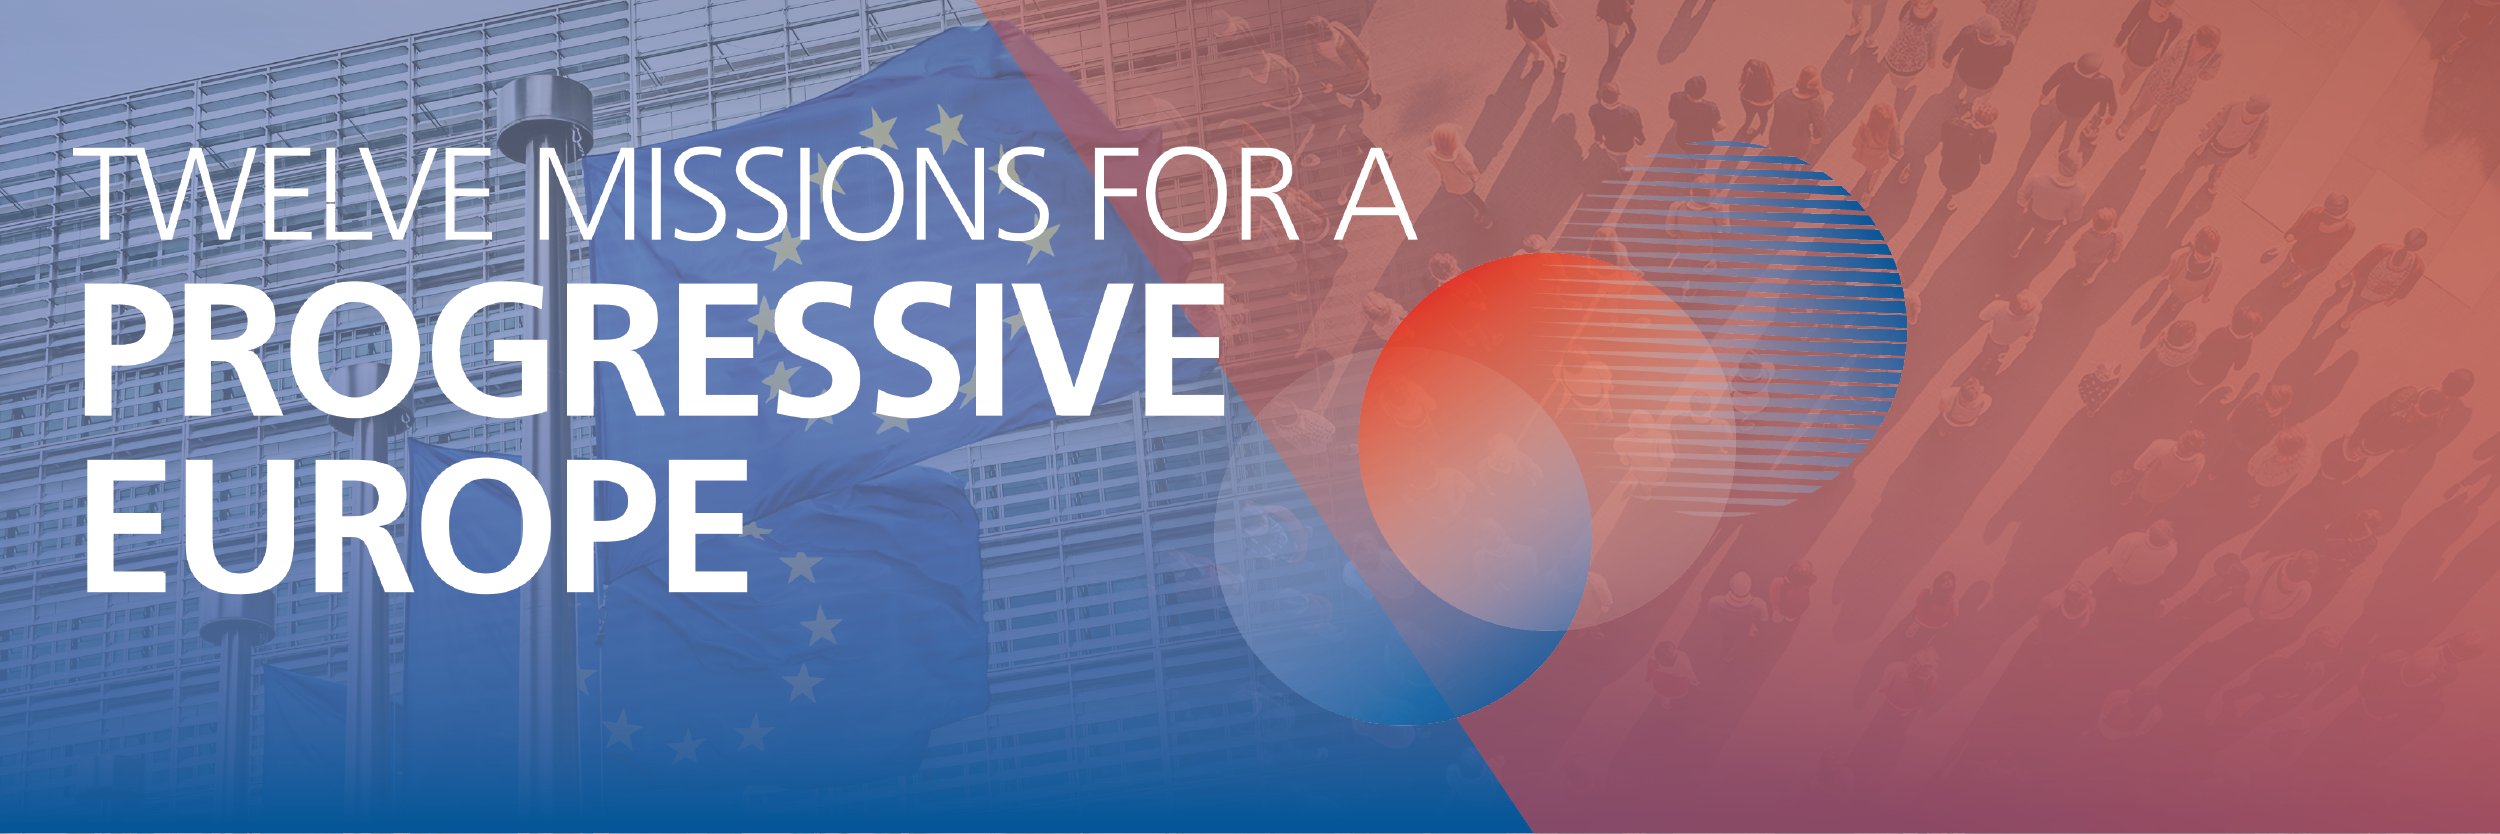 Header Picture "Twelve Missions for a Progressive Europe"